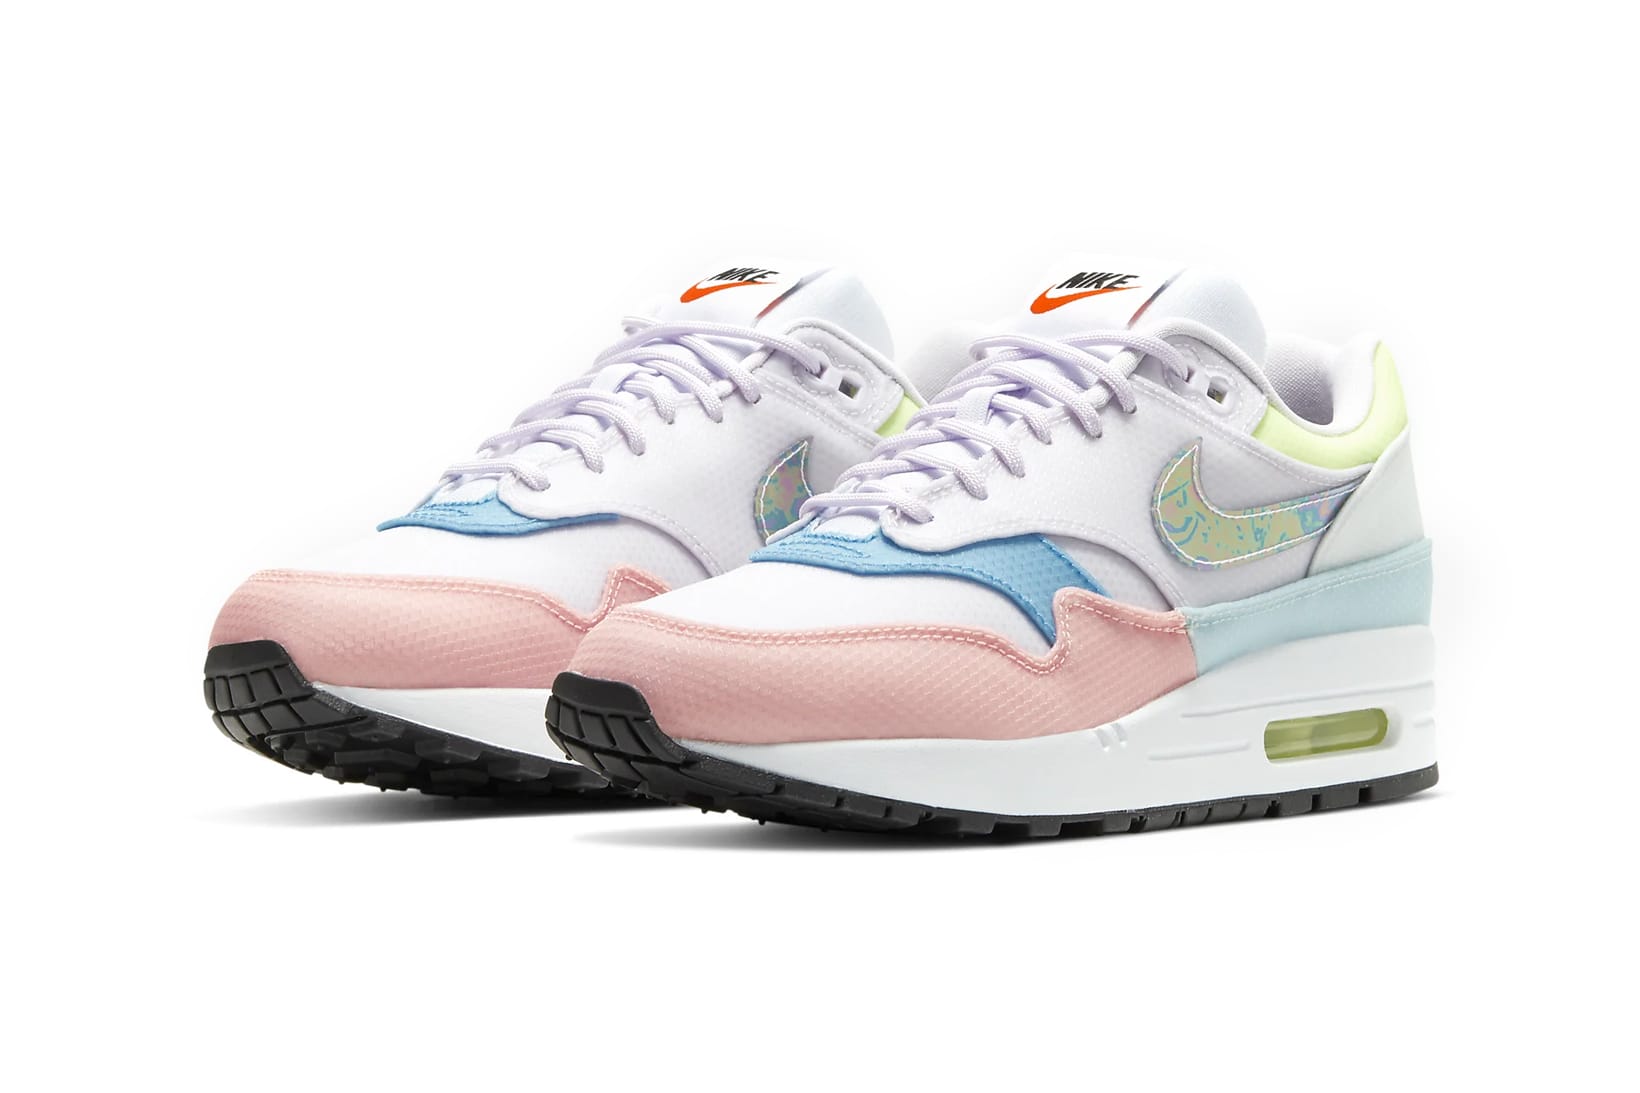 nike air max 1 se overbranded women's shoe